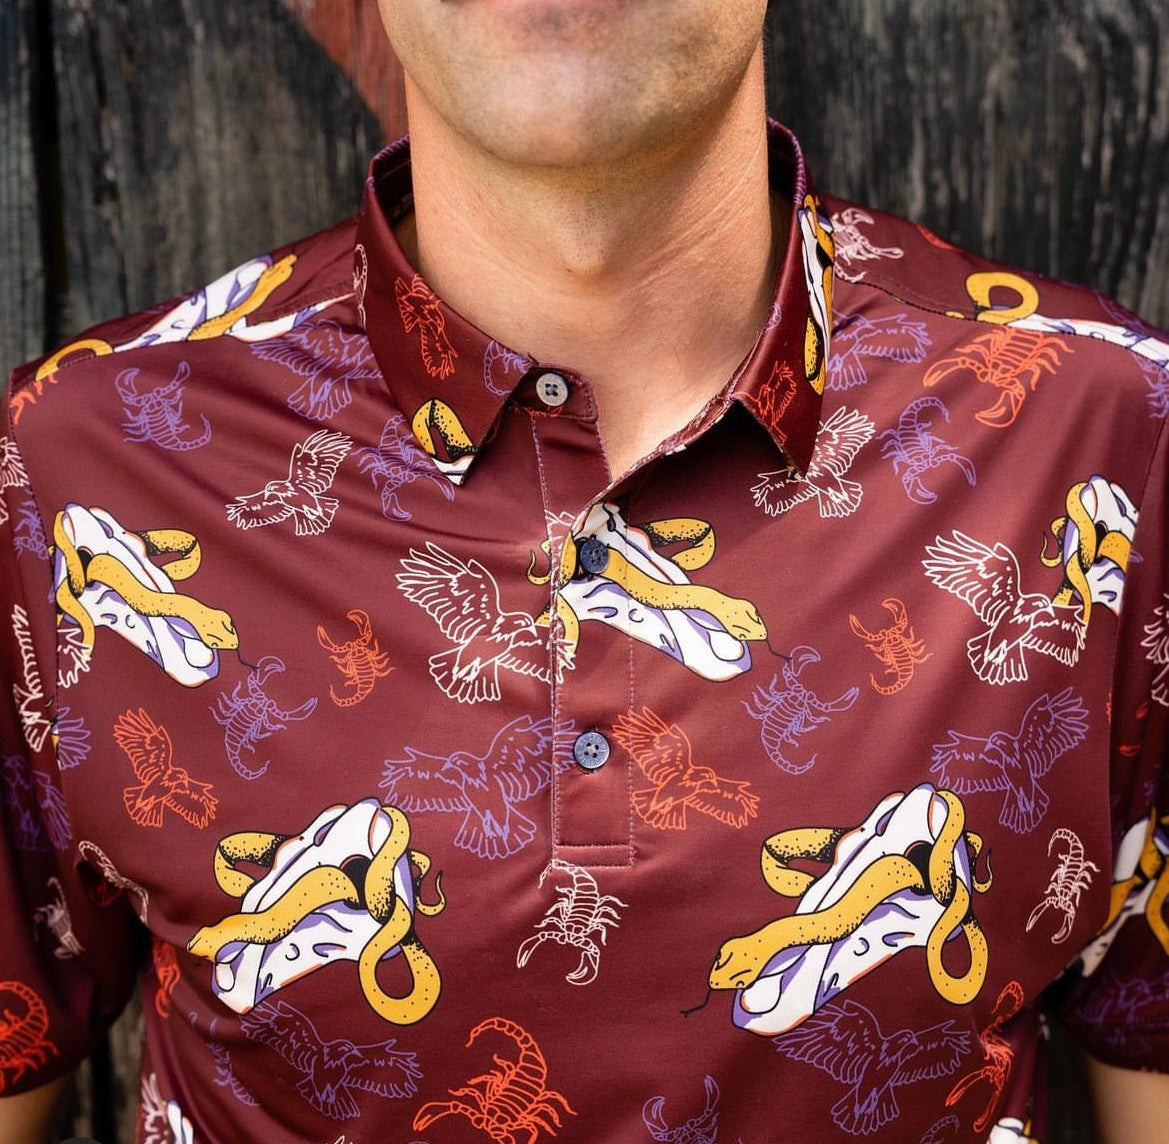 male model wearing a close-up of a maroon shirt with skull print